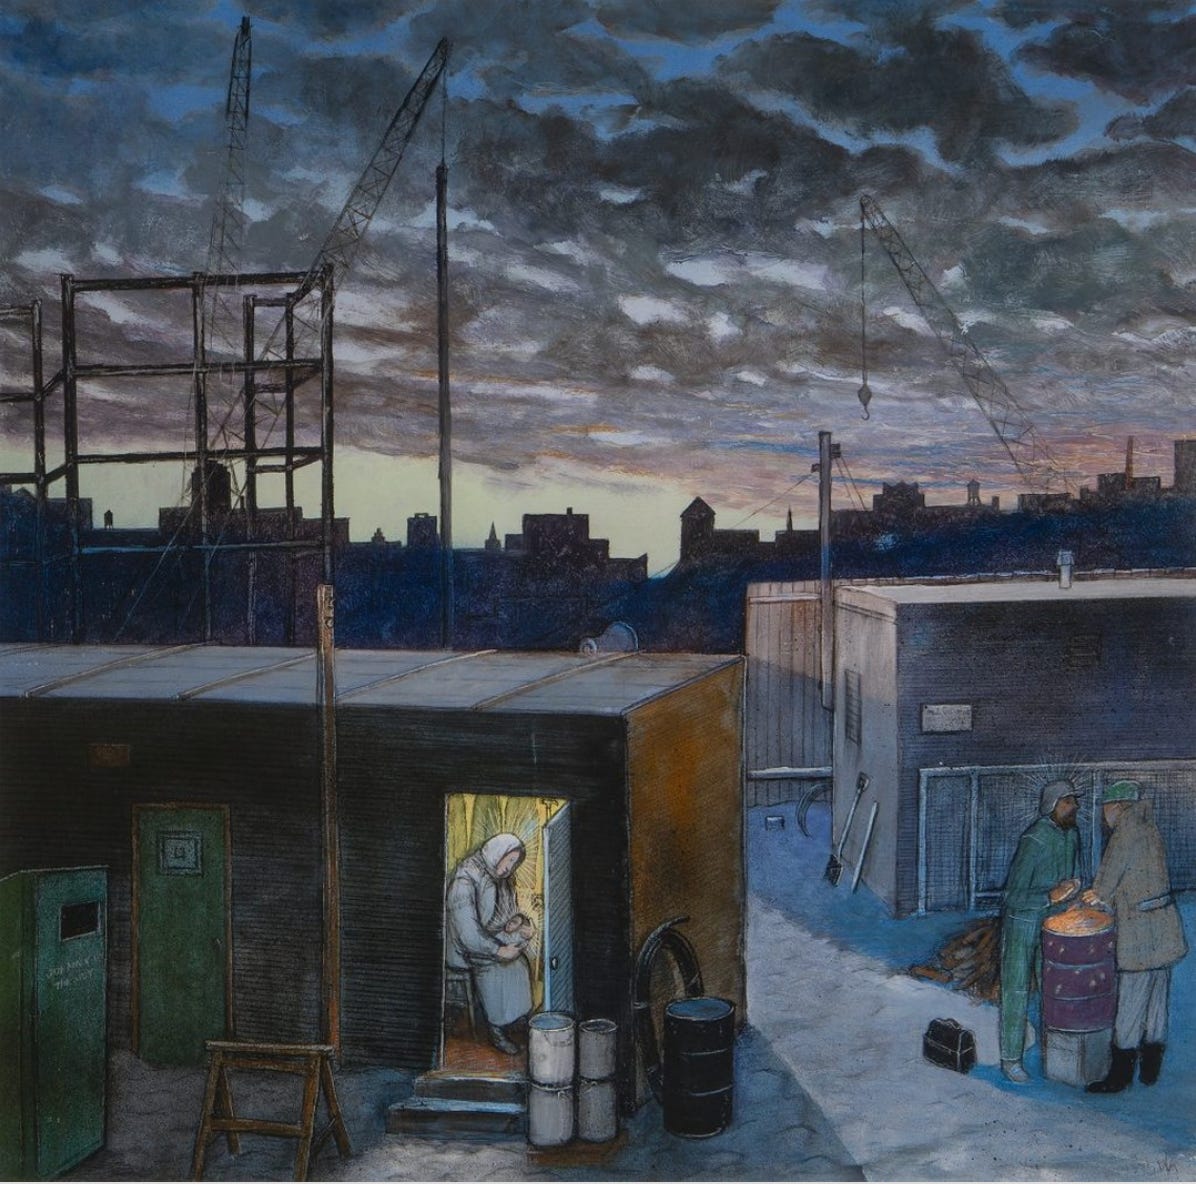 painting of a woman cradling a baby in a temporary shelter at a construction site. two men warm themselves by a trash-can fire outside